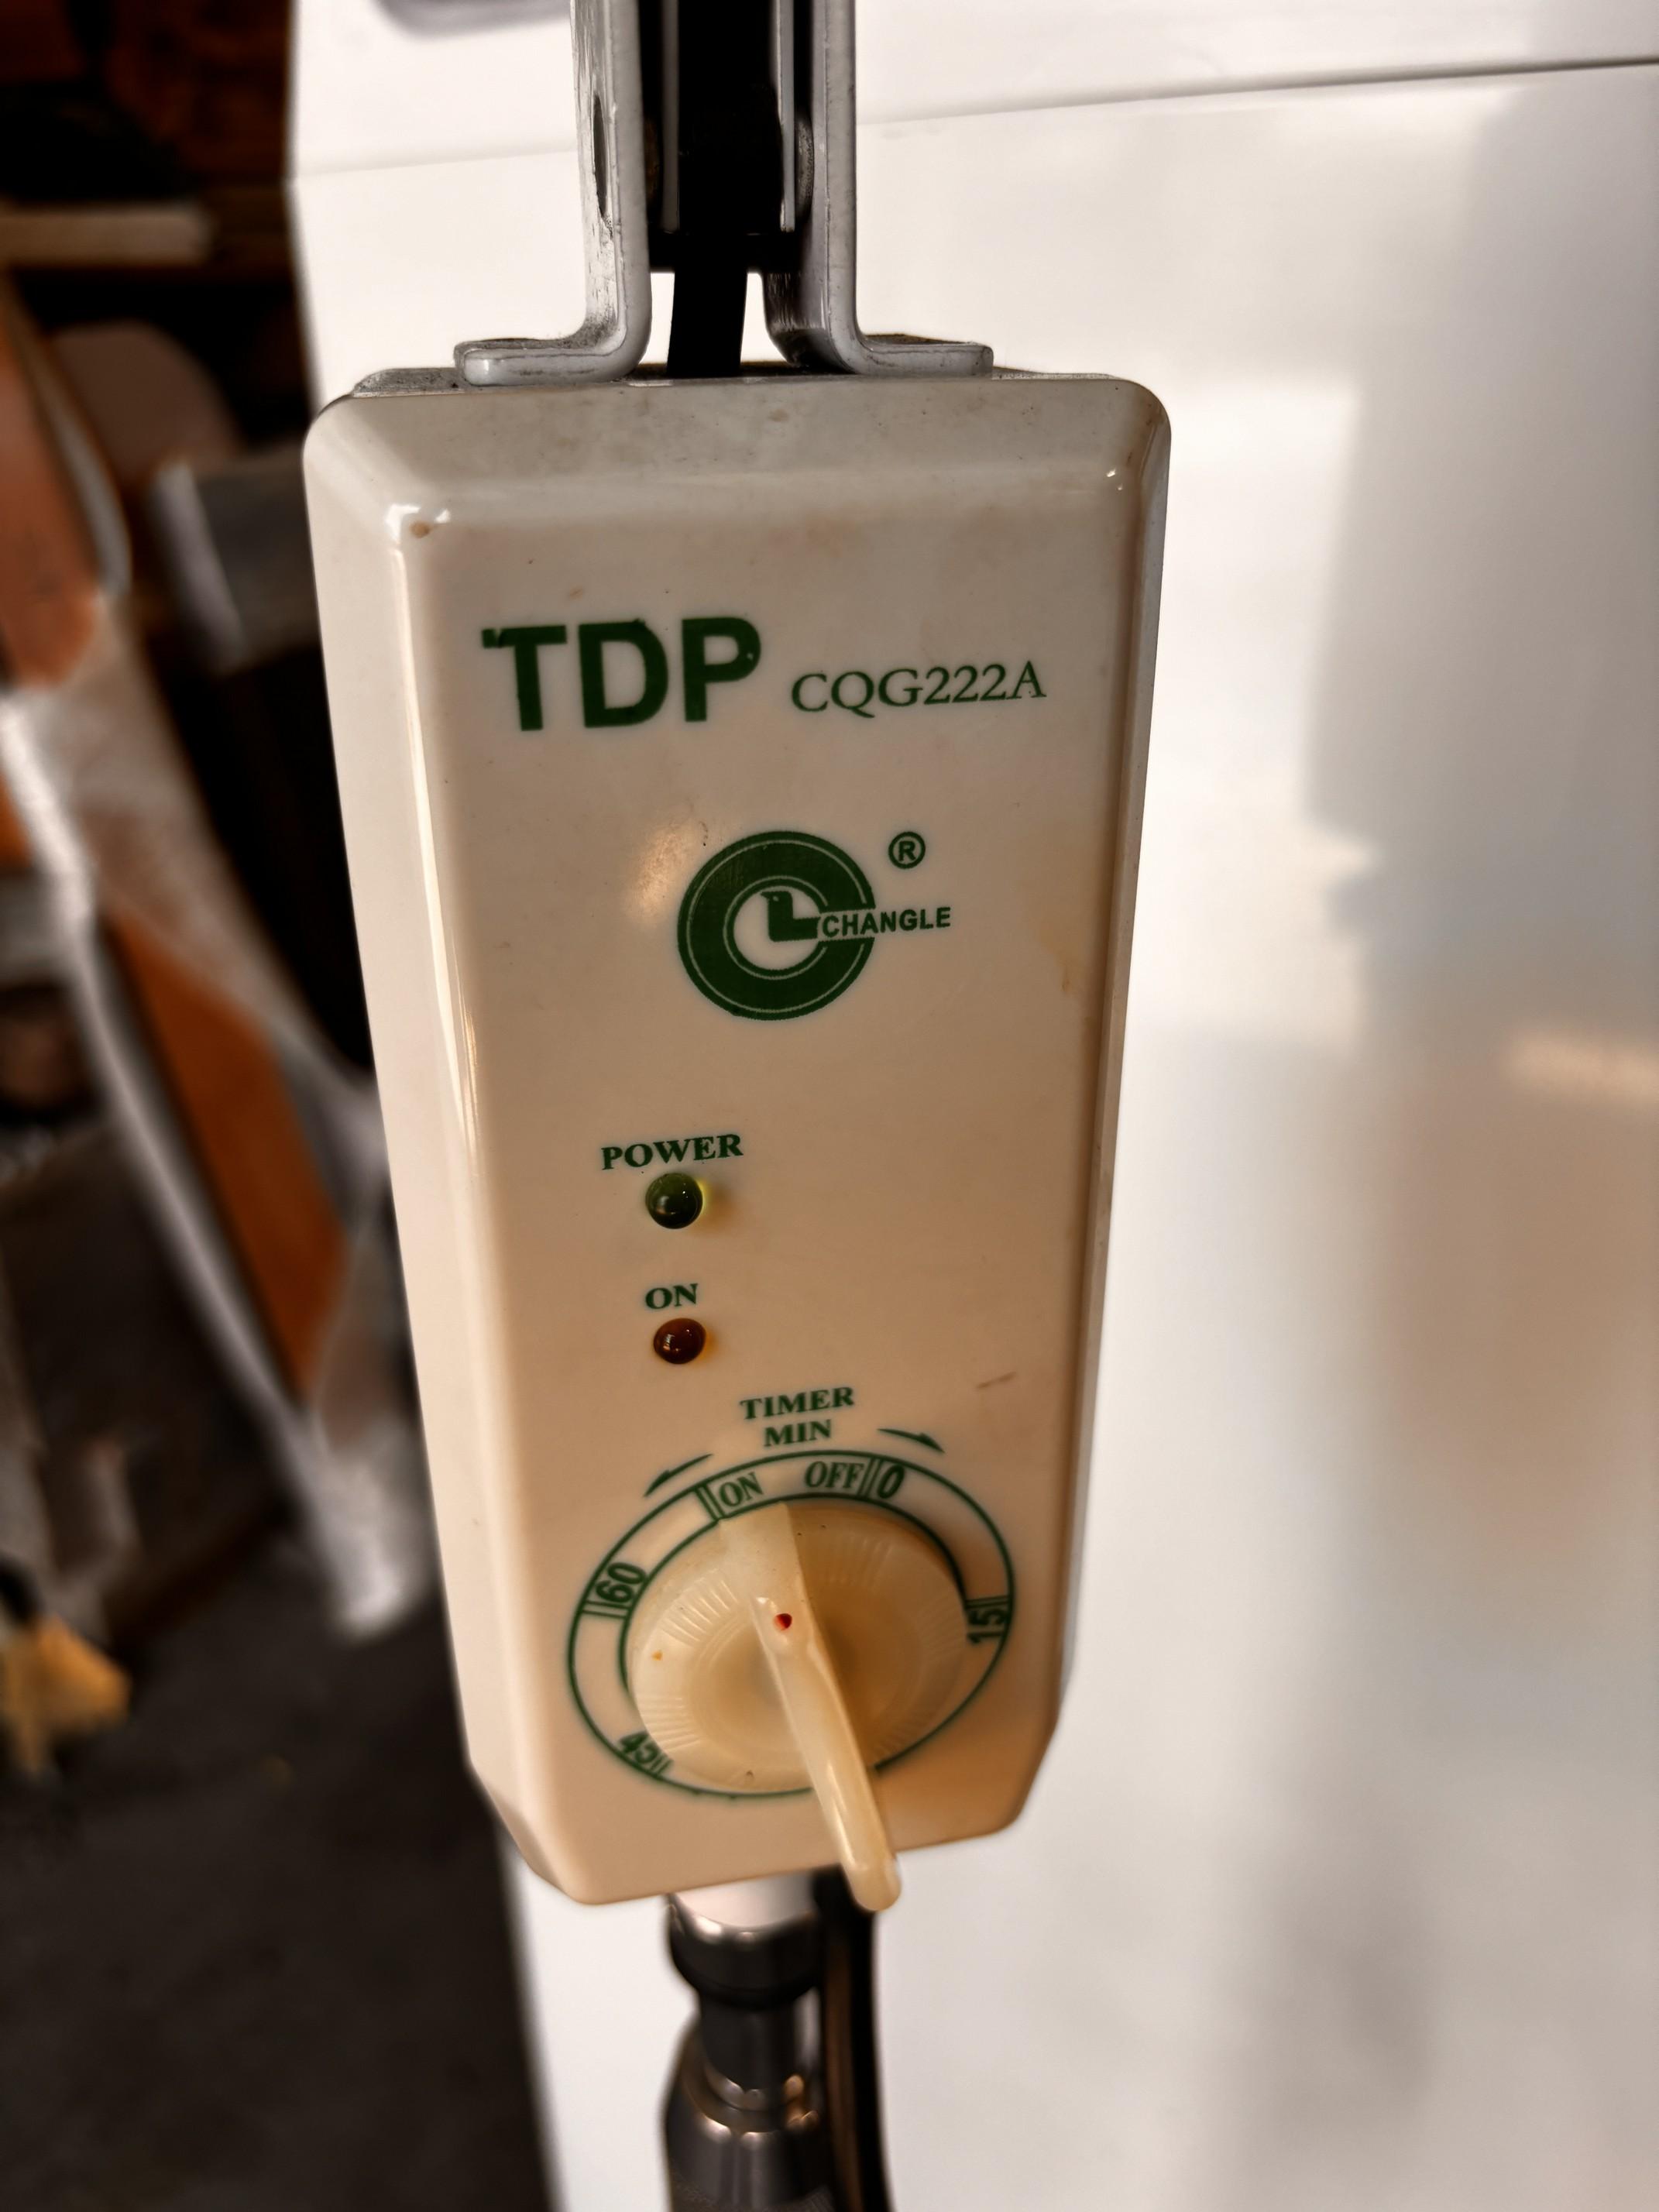 TDP Model CQG222A Portable Light on Casters - This light moves and changes positions easily